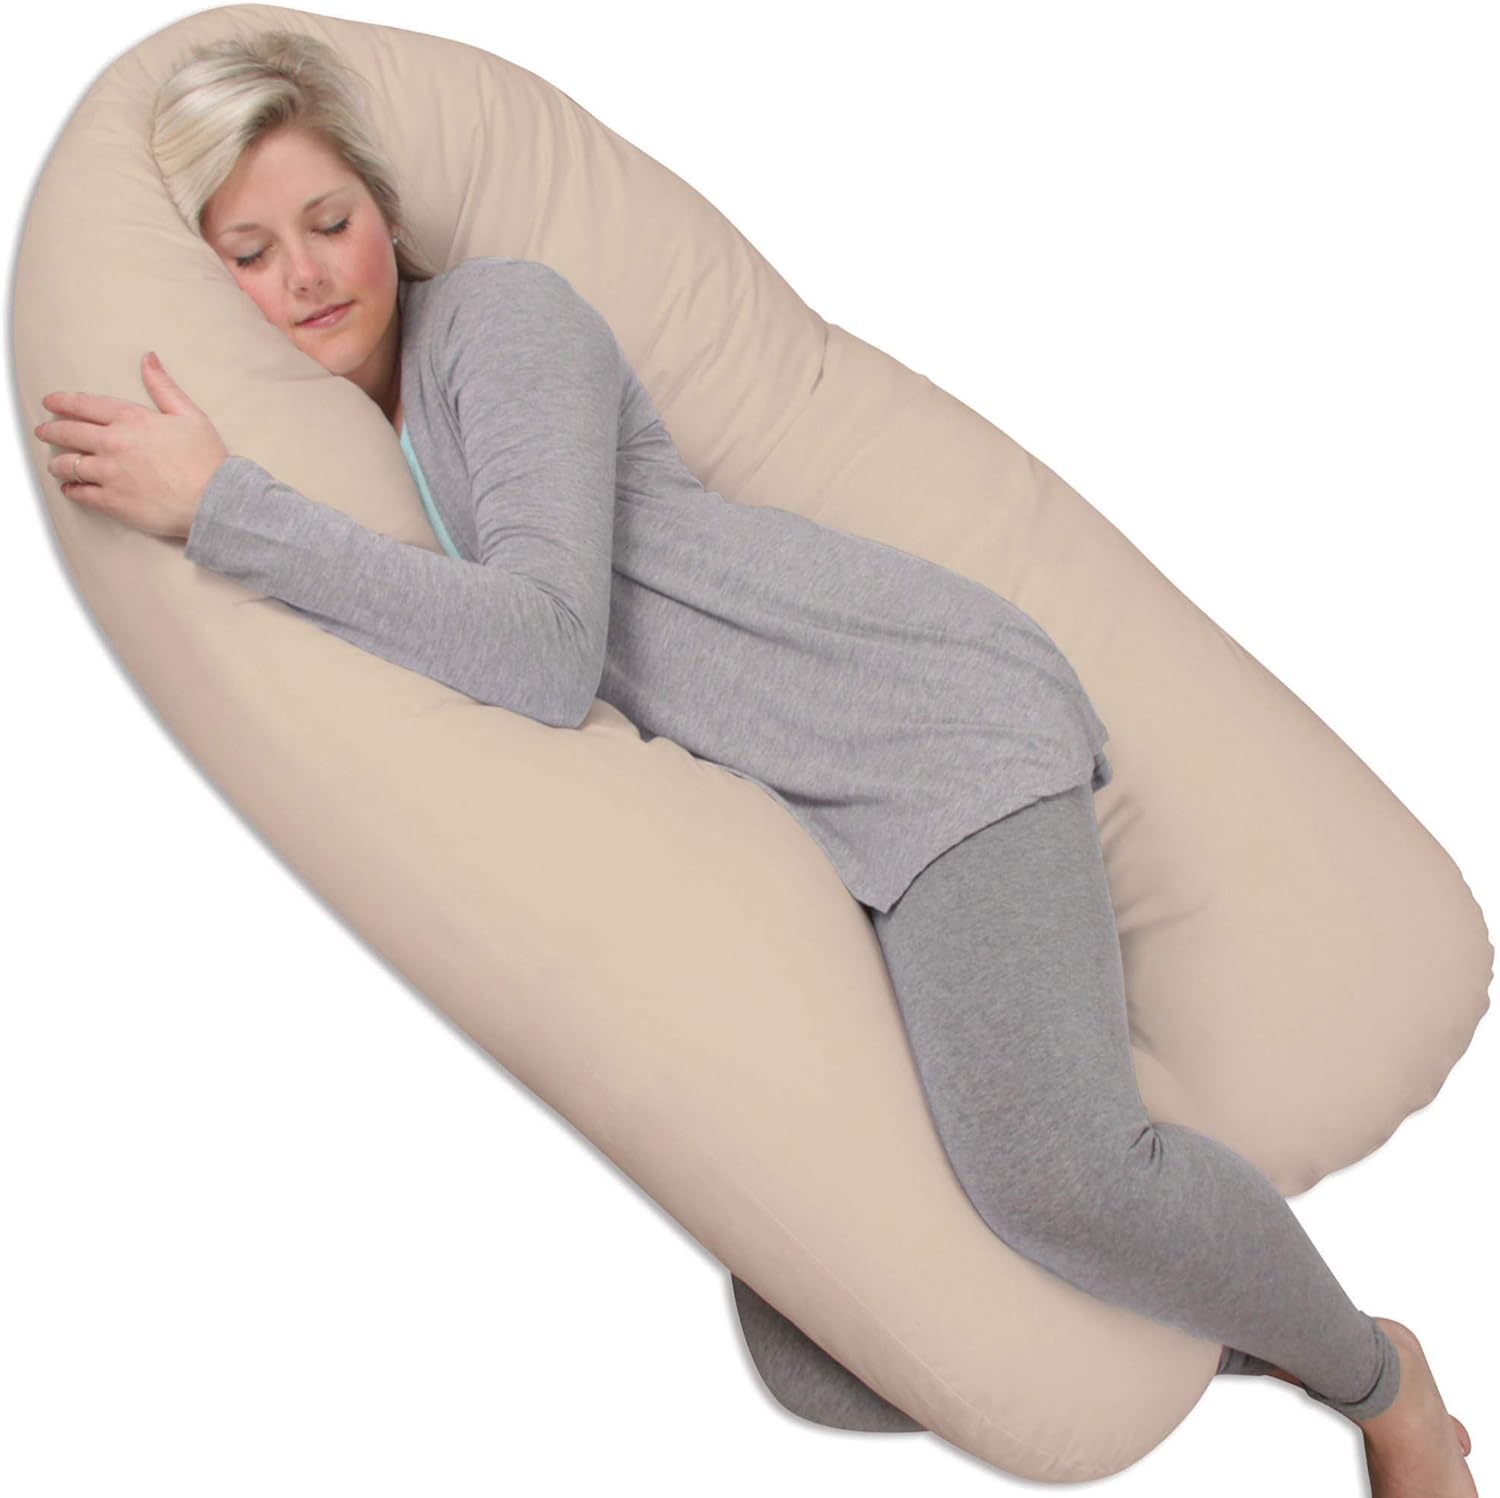 Leachco Back ‘N Belly Bliss Pregnancy Body Pillow Review